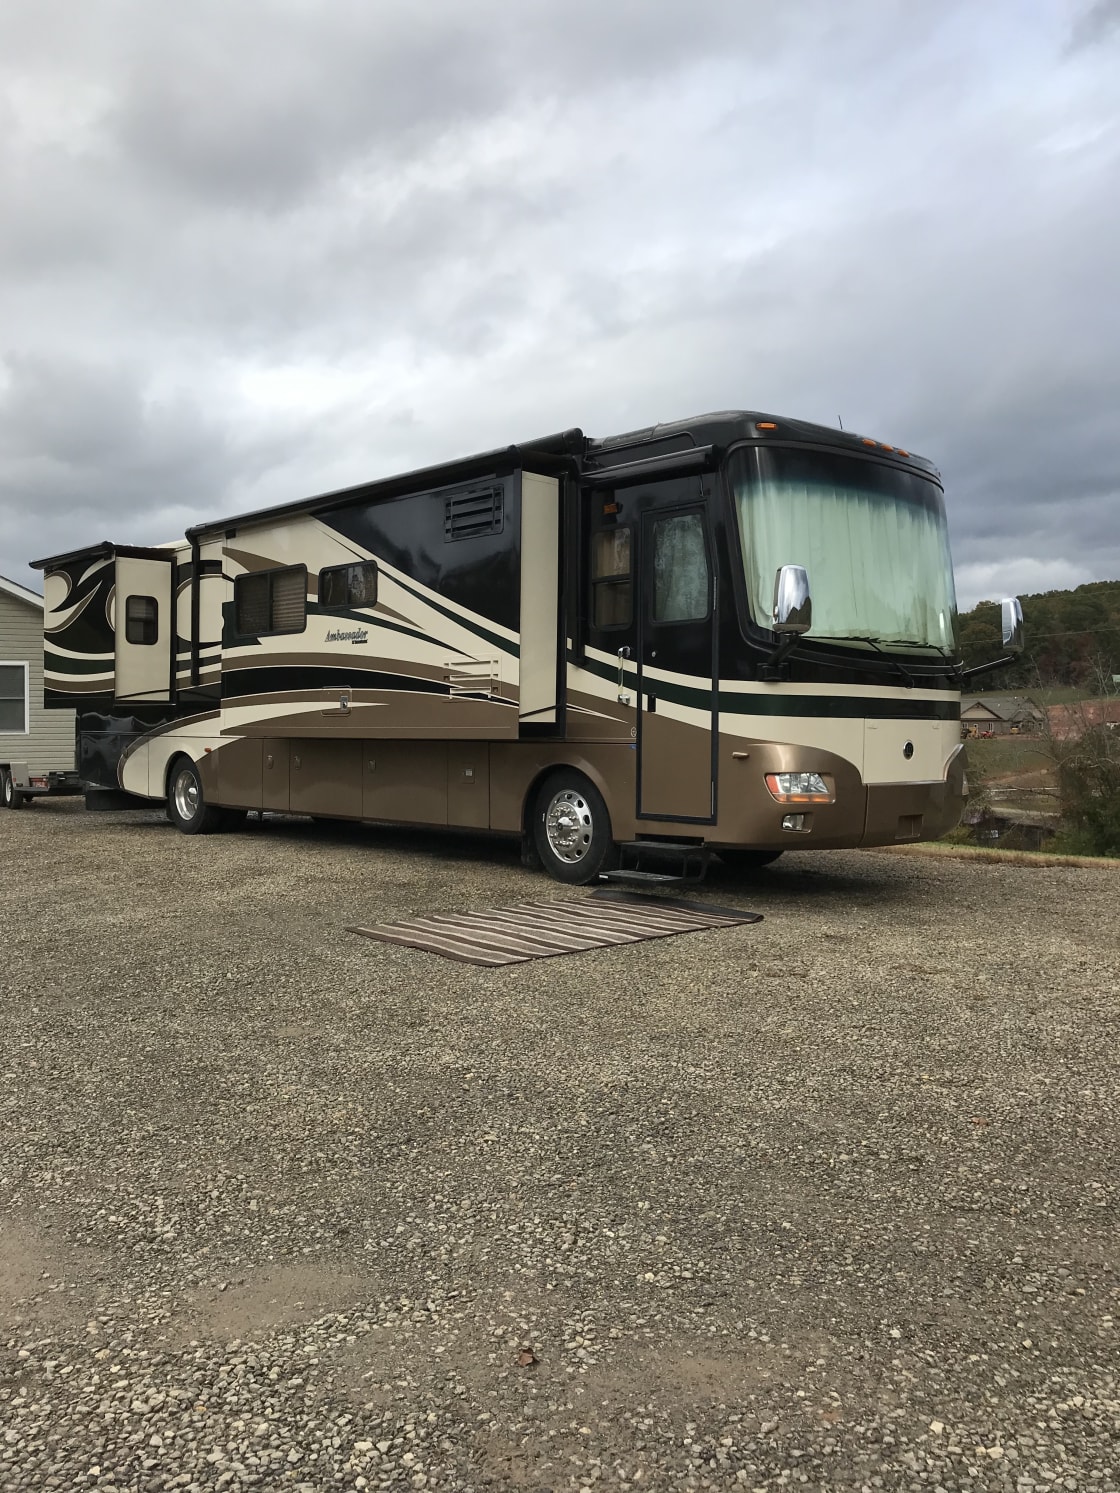 Accommodating all size RVs